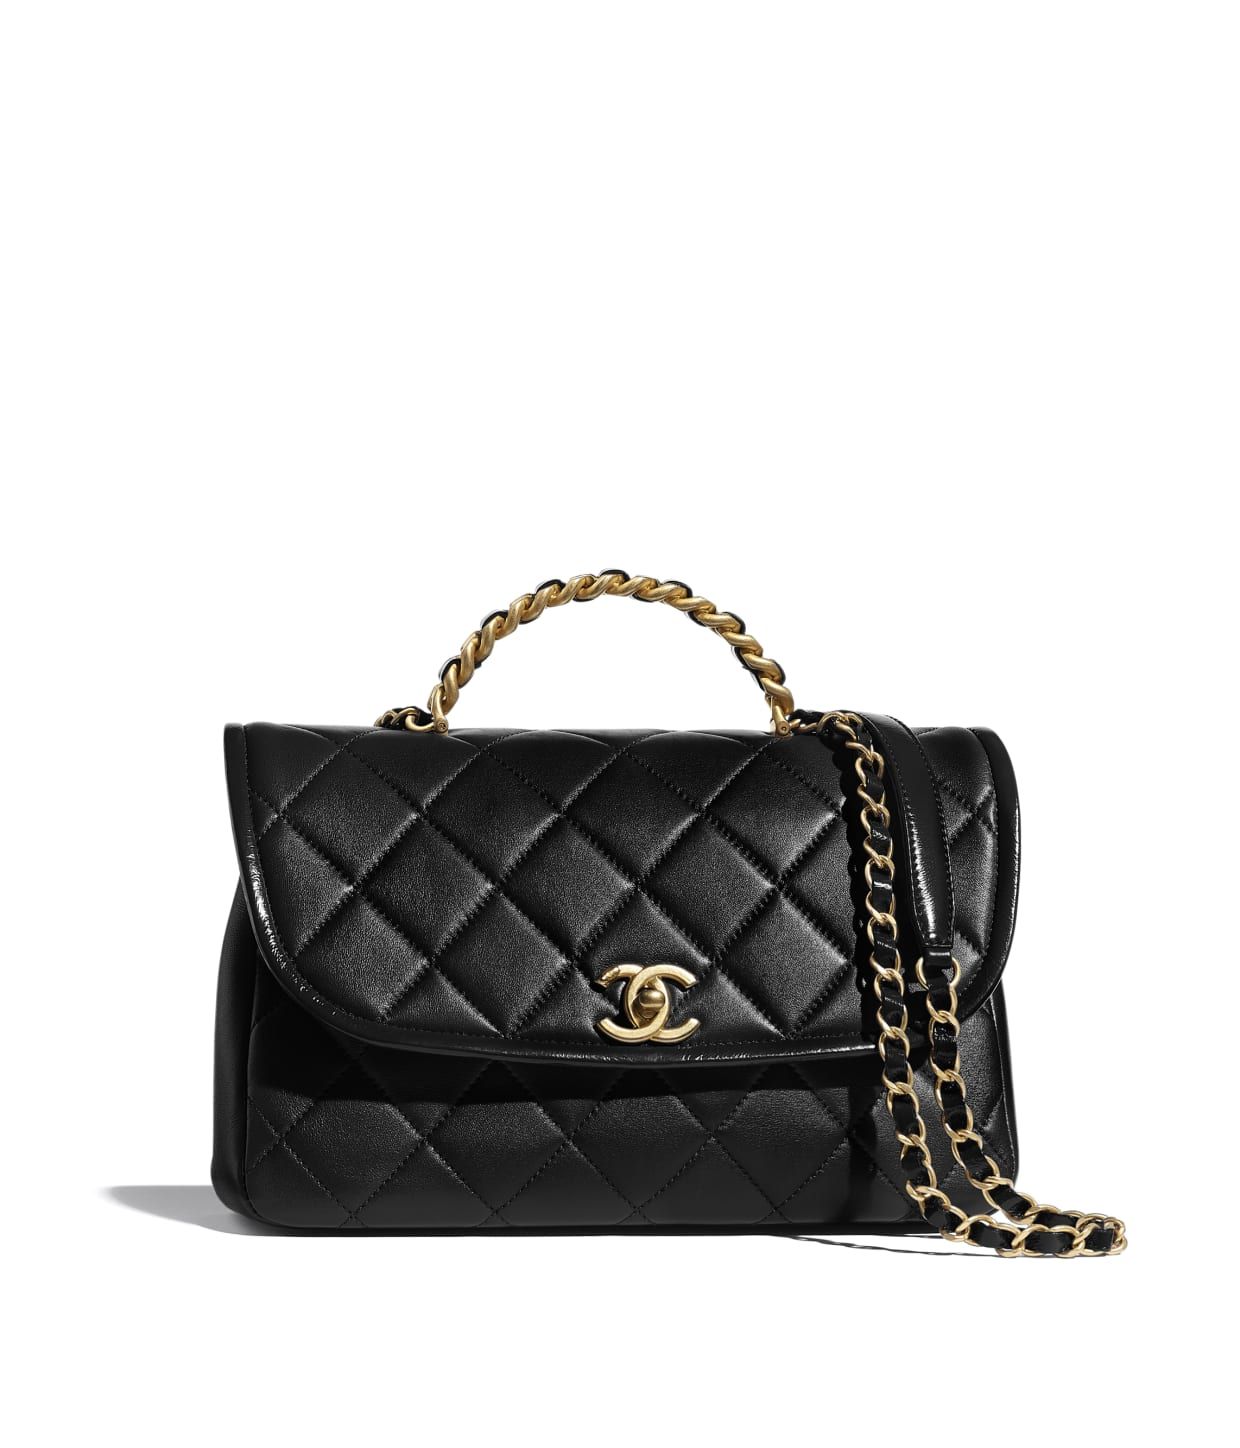 Large Flap Bag with Top Handle | Chanel, Inc. (US)